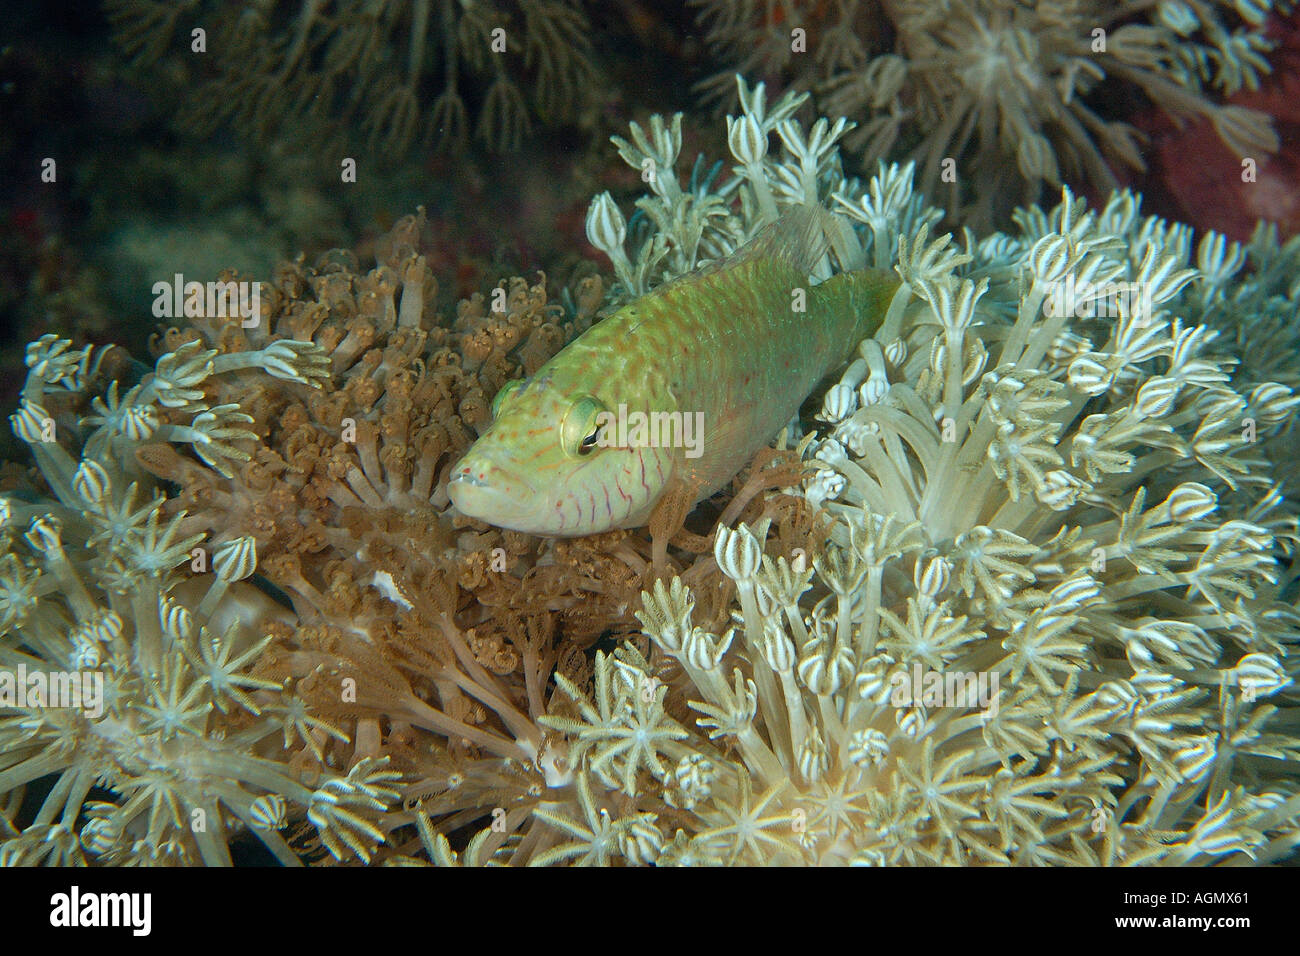 Linedcheeked wrasse Oxycheilinus digrammus perched on flower soft coral Xenia sp Puerto Galera Mindoro Philippines Stock Photo